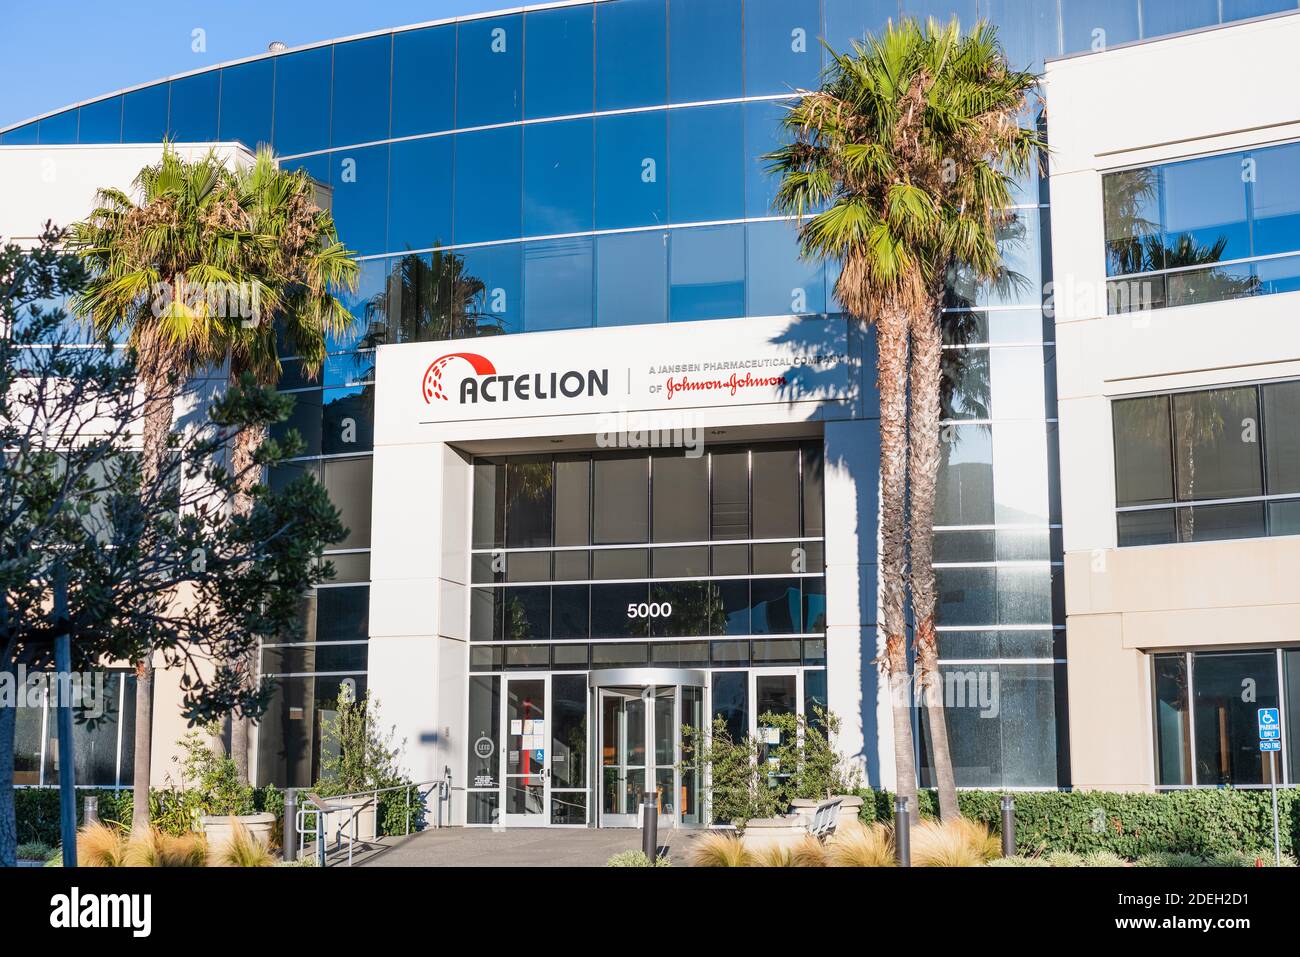 Sep 21, 2020 South San Francisco / CA / USA - Actelion headquarters in Silicon Valley; Actelion is a pharmaceuticals and biotechnology company part of Stock Photo